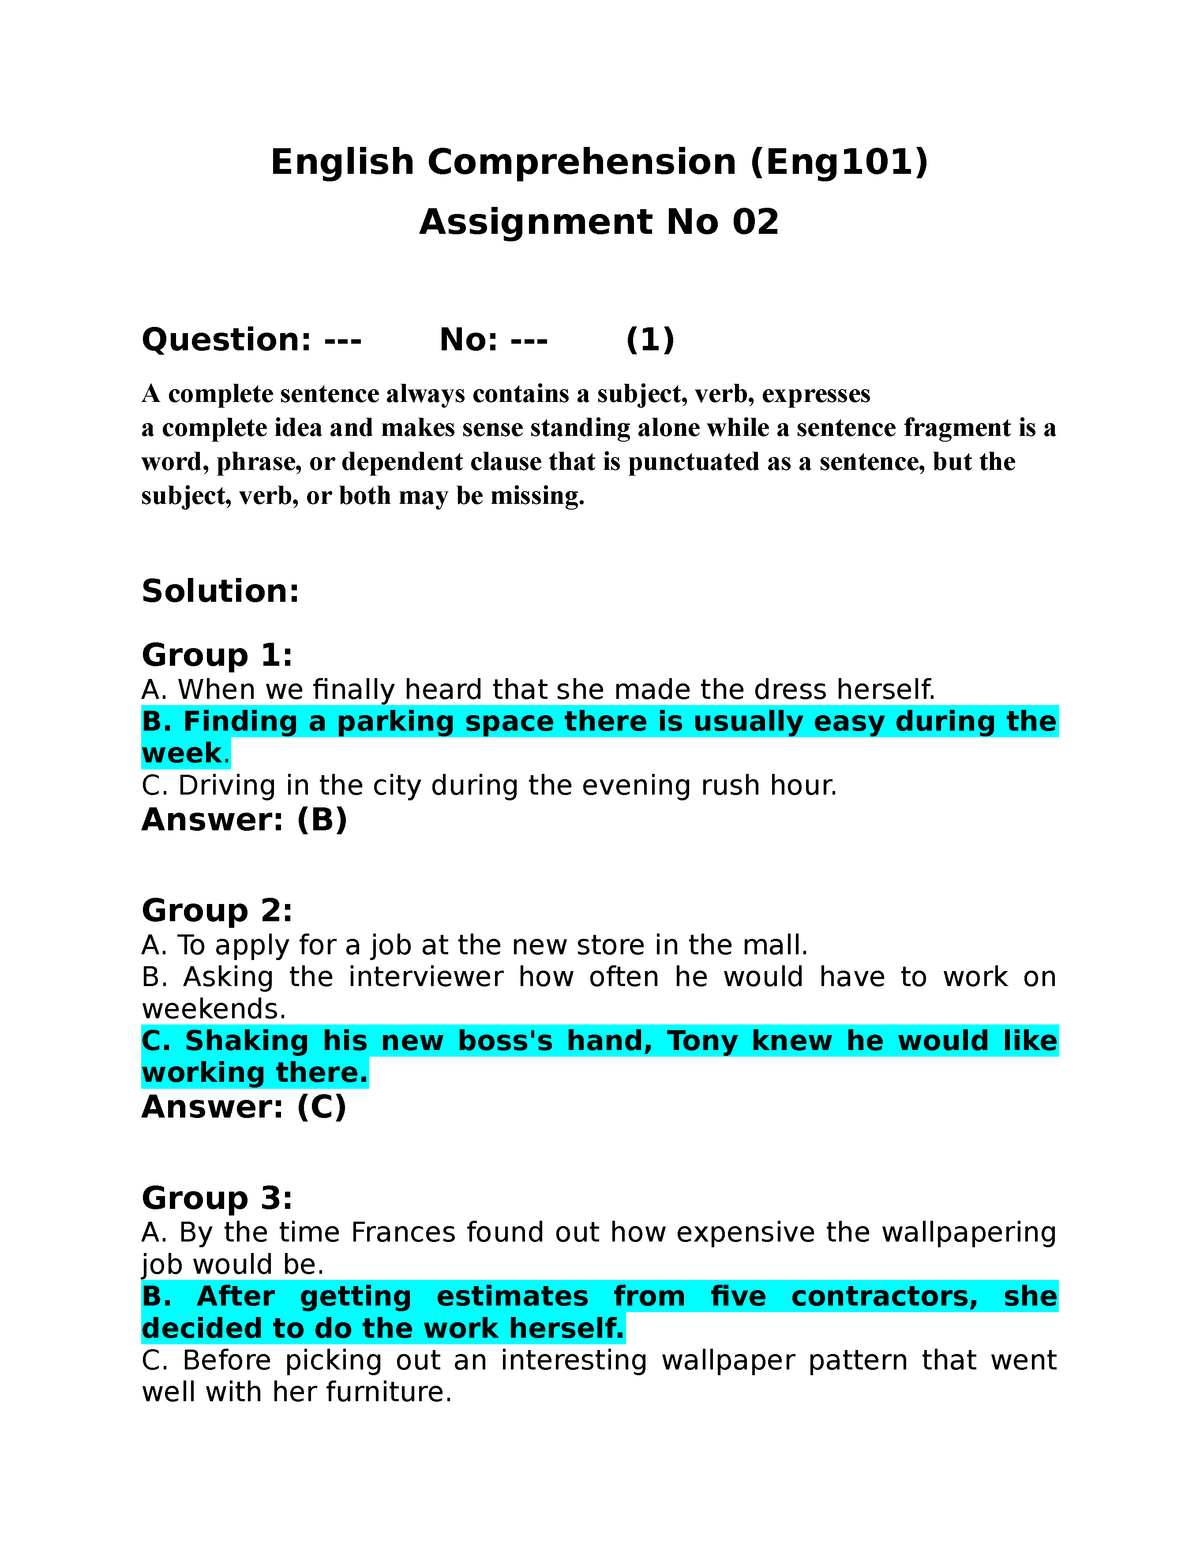 english 201 assignment 2 solution